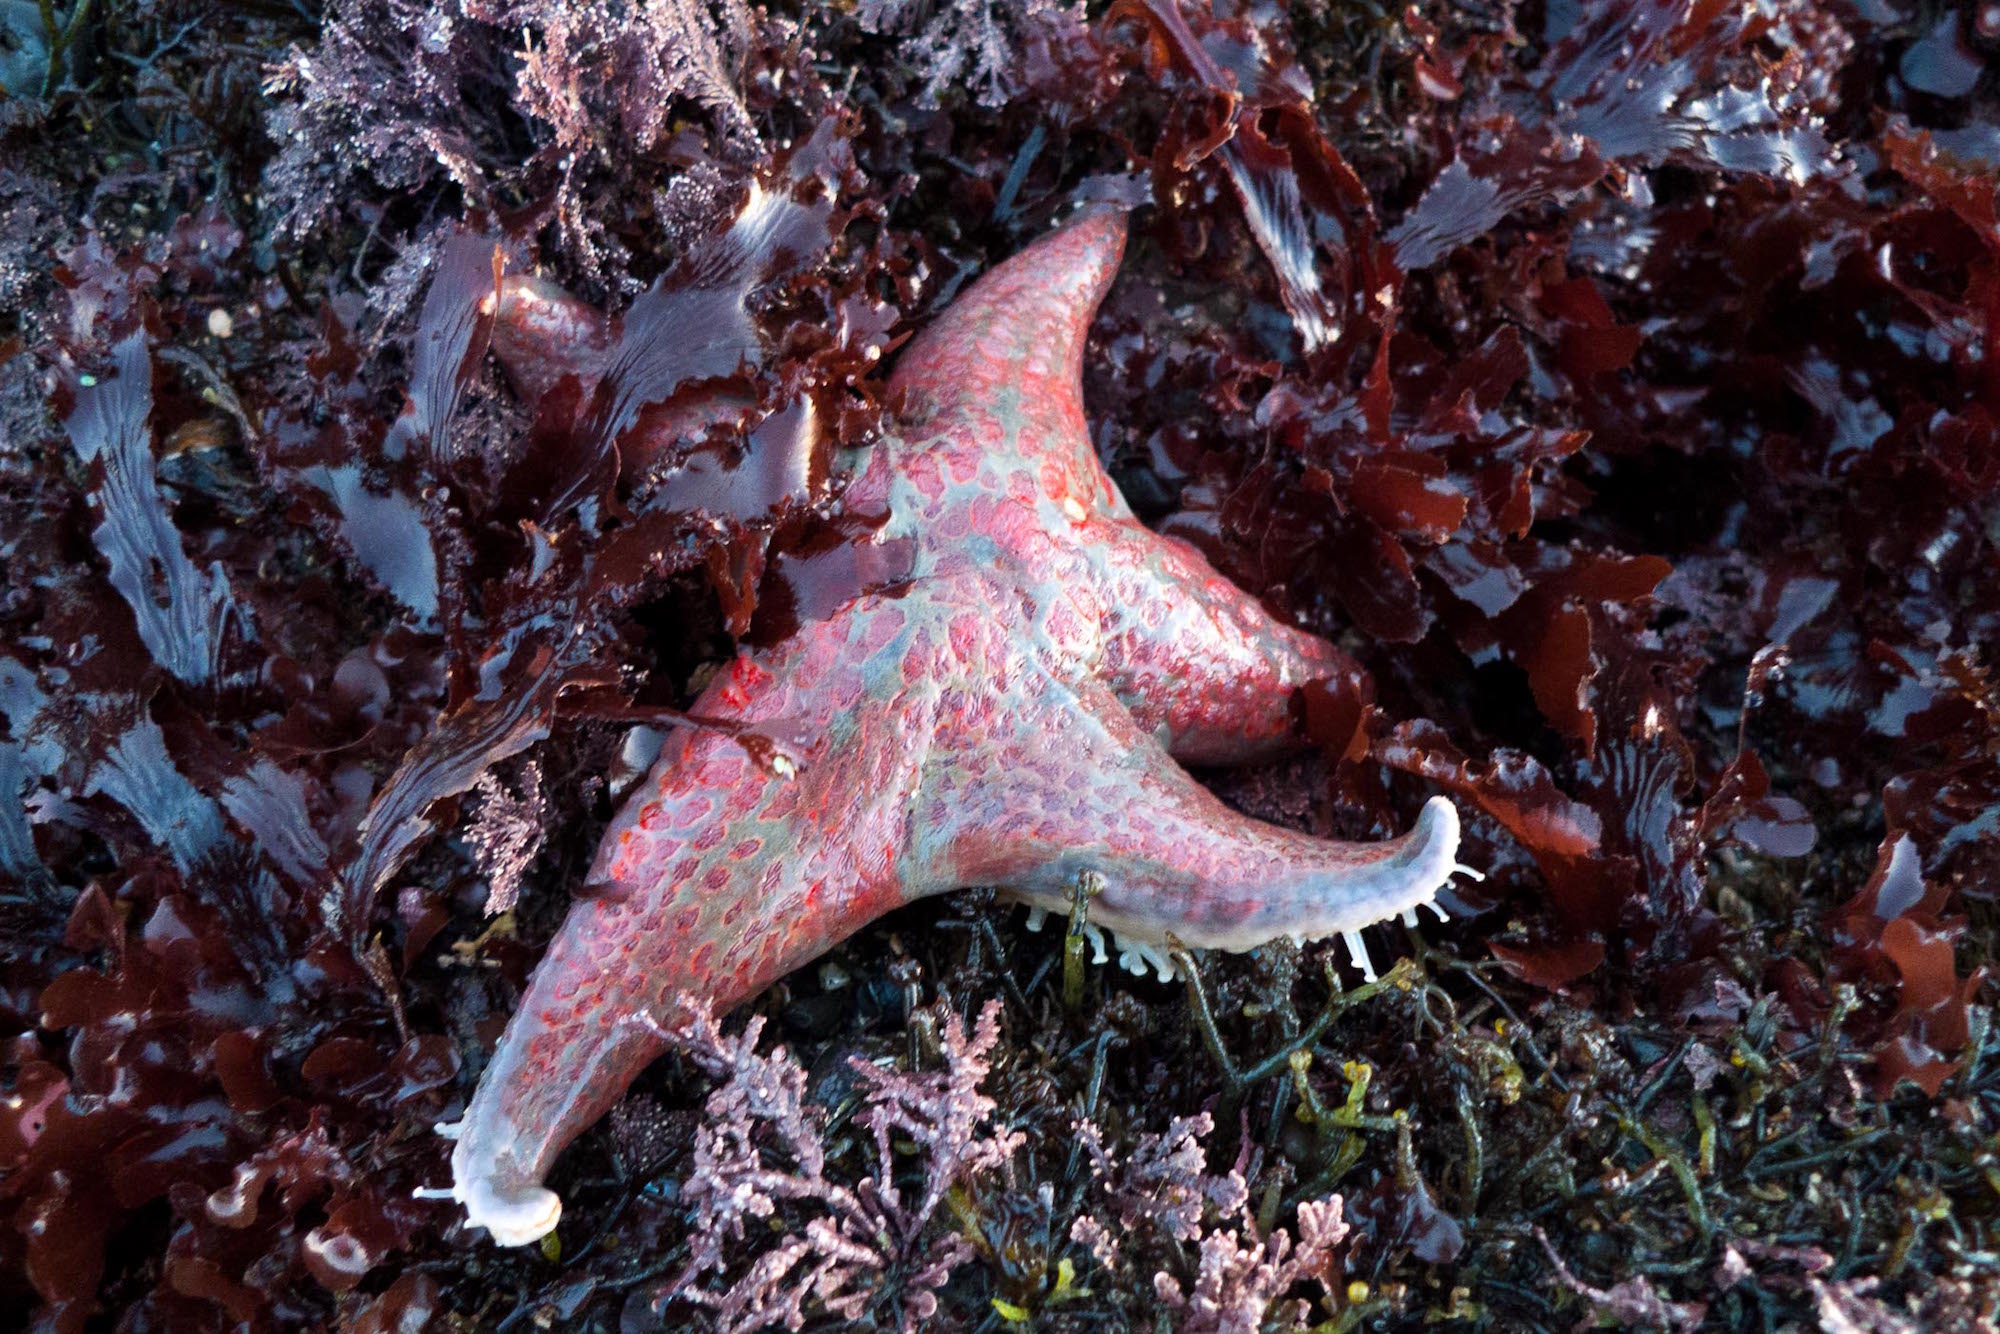 Sea stars, which often go by the misnomer "starfish," have been vanishing from the Pacific coast at an alarming rate.